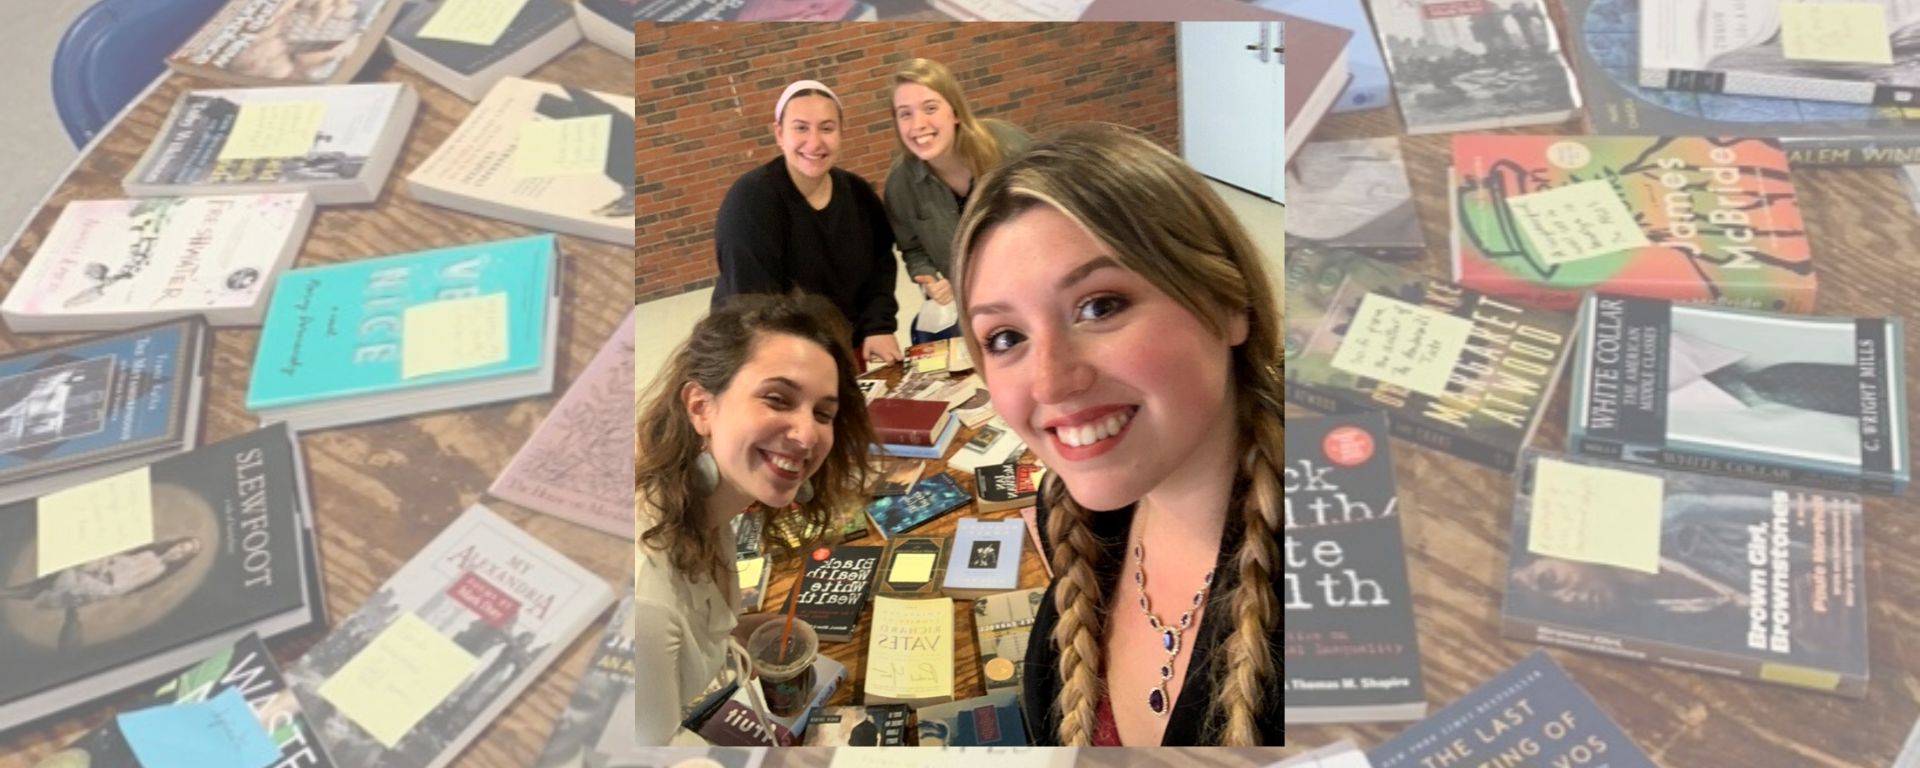 Undergraduate Department Representatives Cayenn Landau, Hannah Heimann, Irina Znamirowski, and Autumn Bellan smile for a selfie in front of a transparent image of the books brought to the Meet the Major / Book Exchange event.